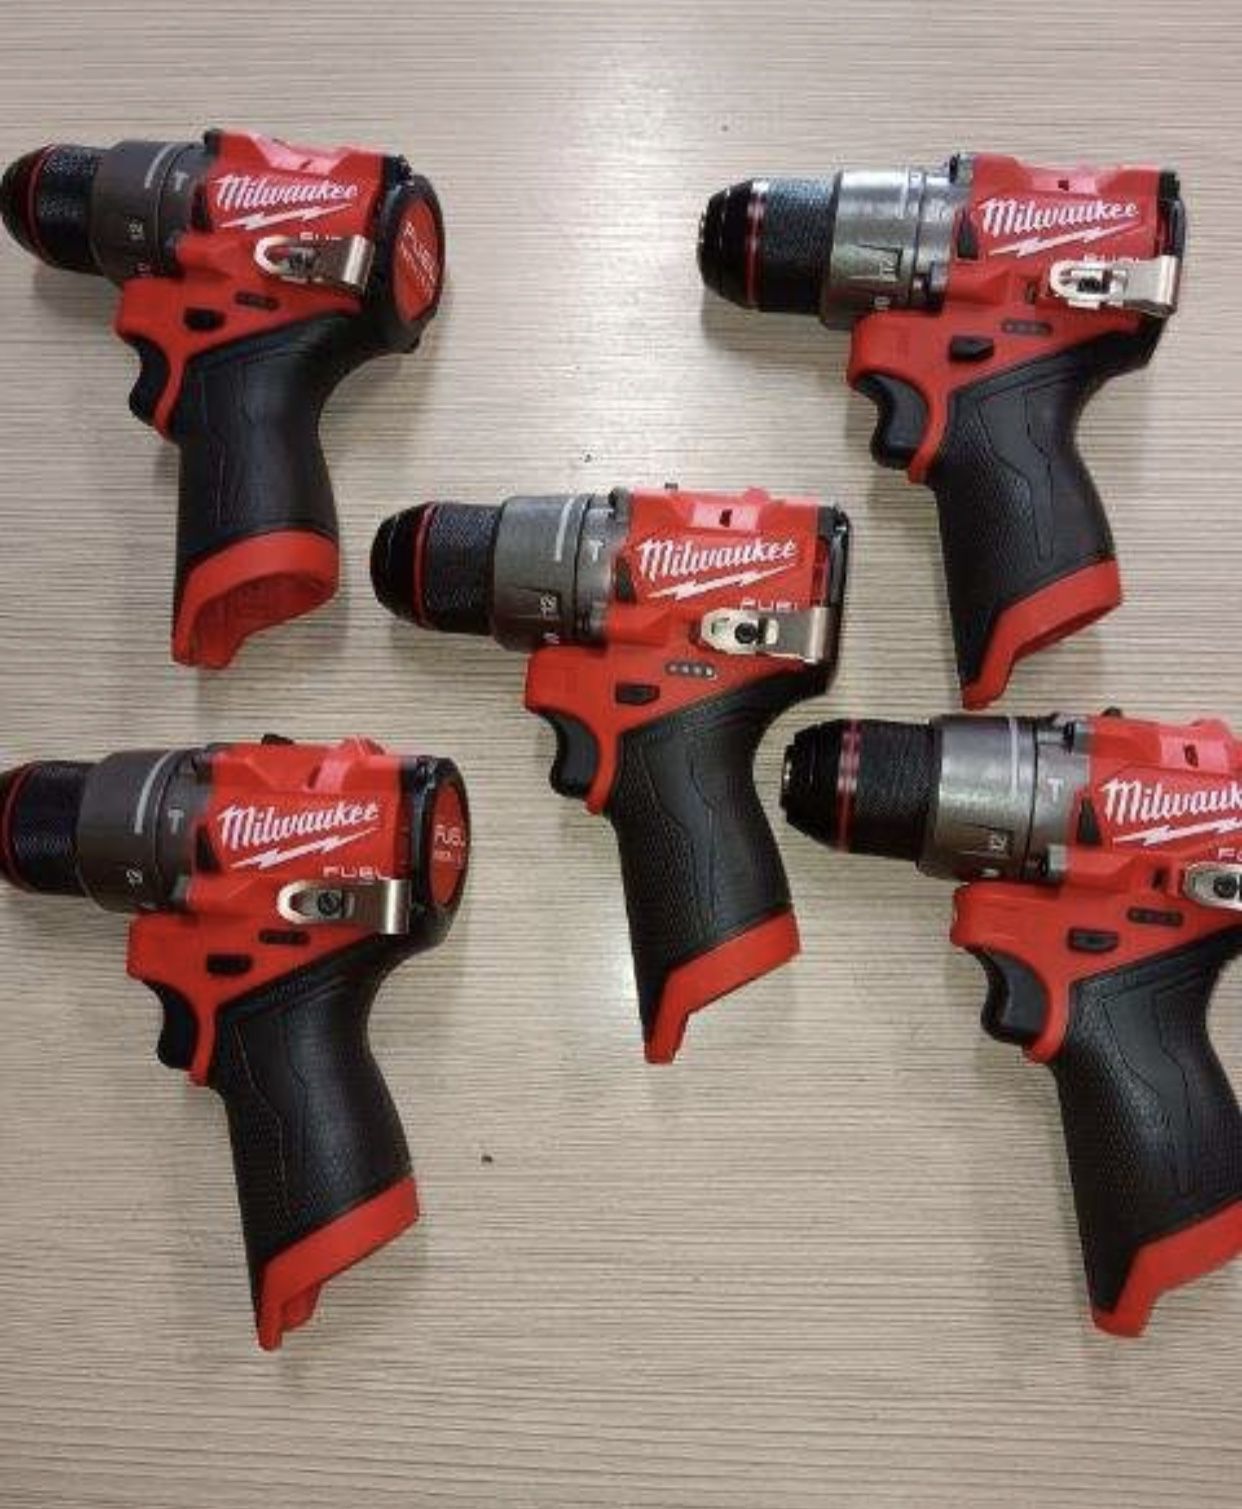 Milwaukee New Hammer Drill Fuel M12 (Tool Only) New Generation $85 Each One 